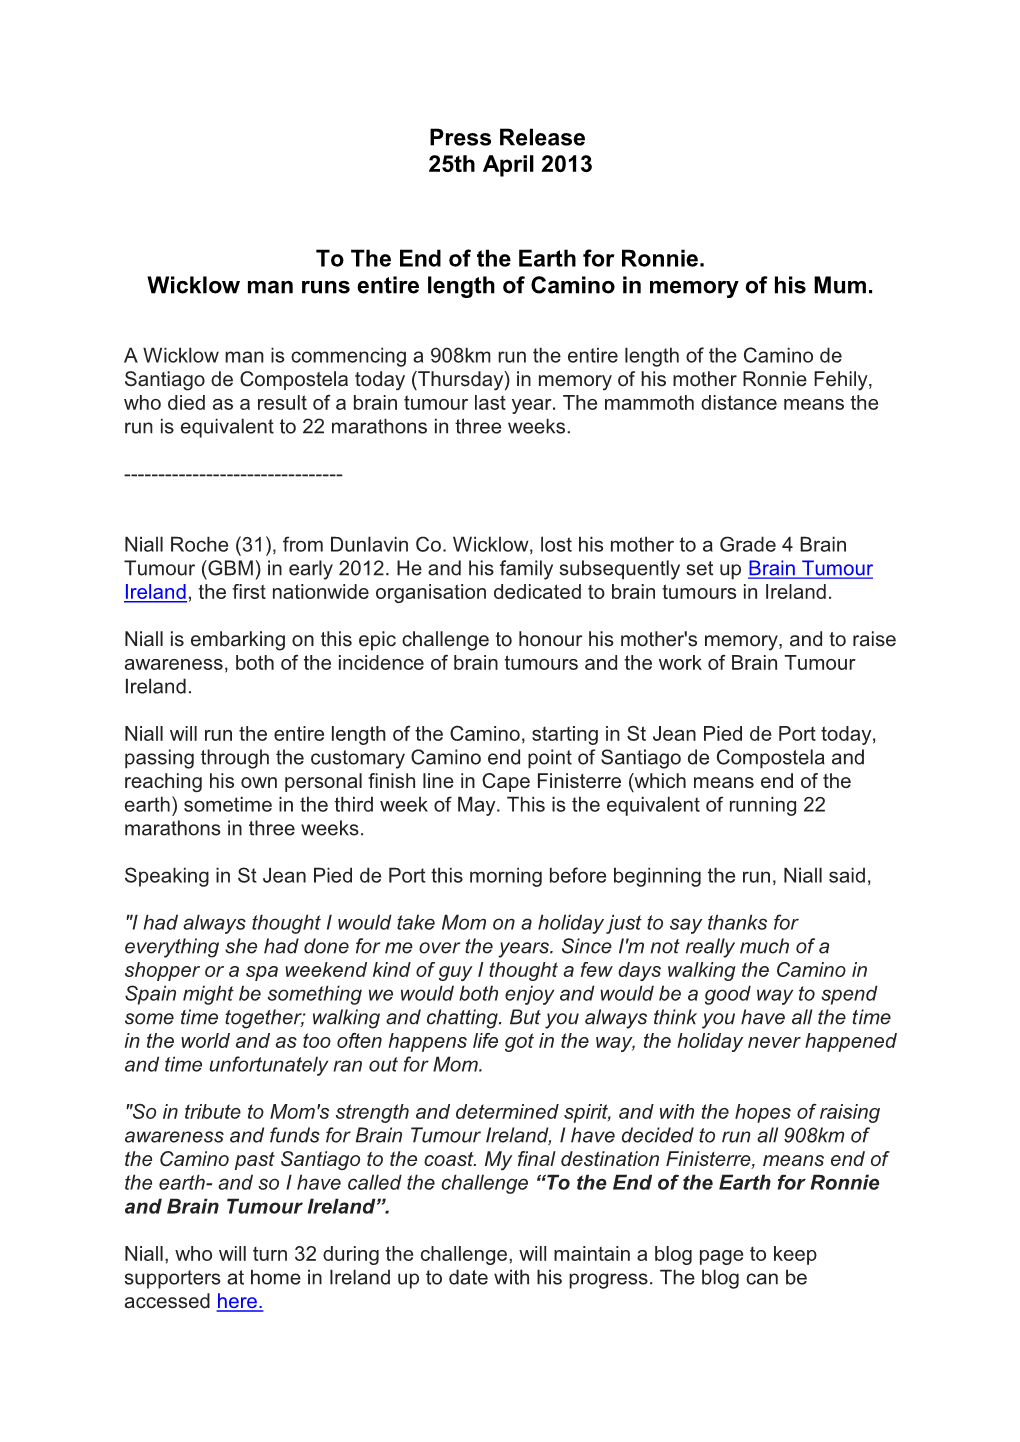 Press Release 25Th April 2013 to the End of the Earth for Ronnie. Wicklow Man Runs Entire Length of Camino in Memory of His Mum